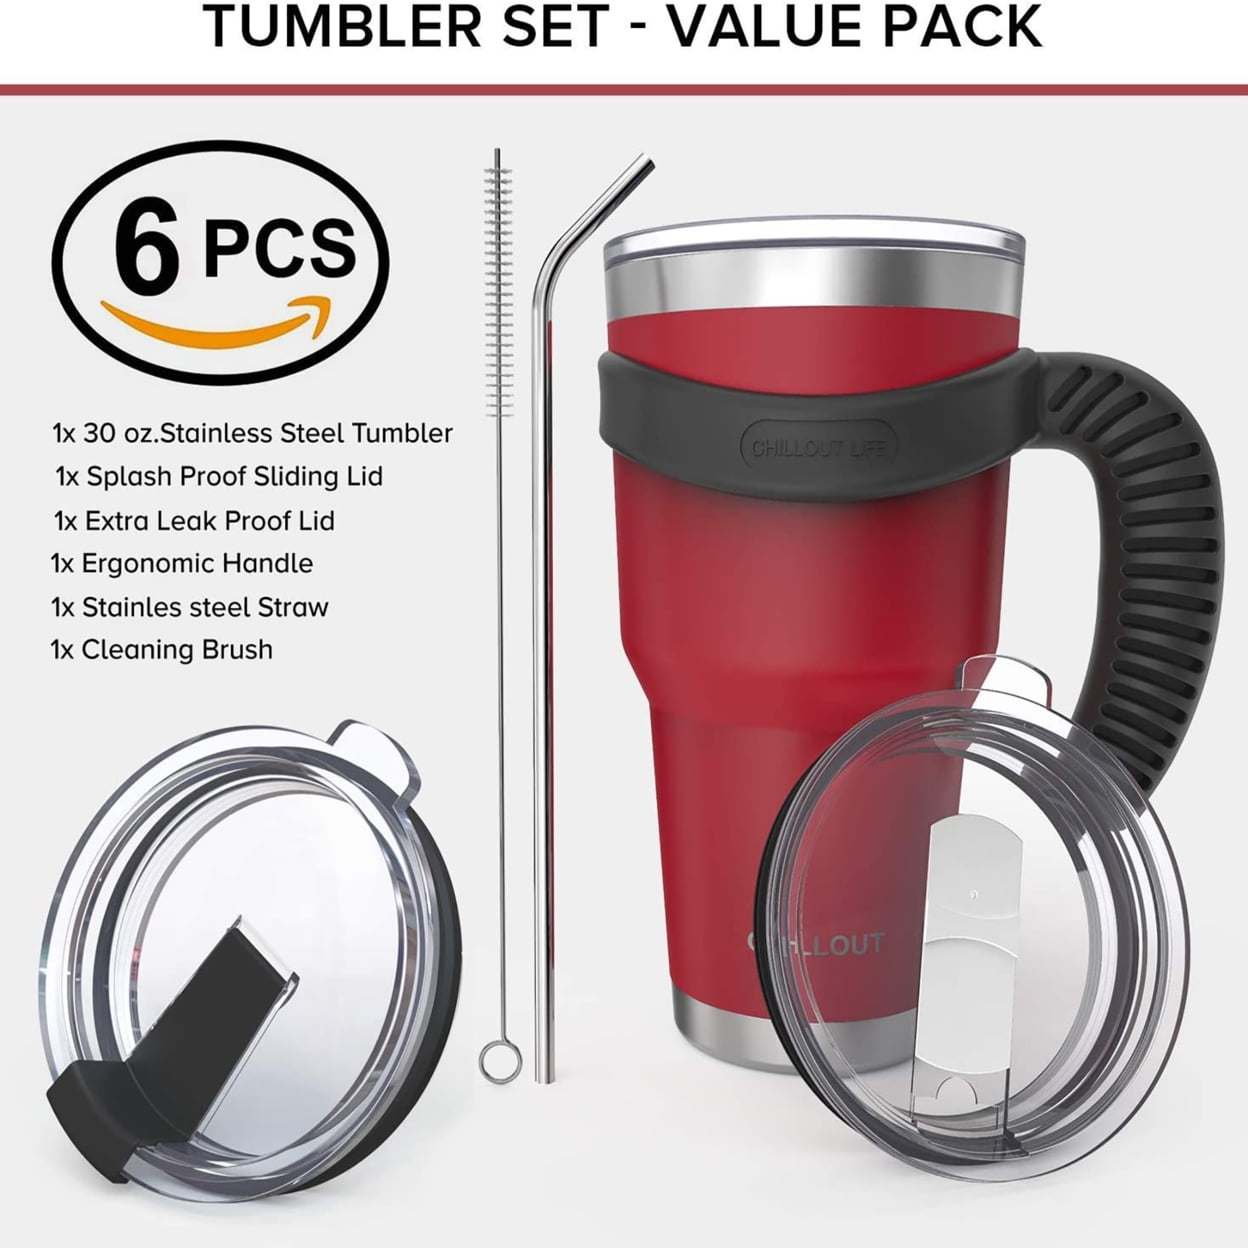 2 Handles for CHILLOUT LIFE Tumbler 30 oz / YETI / Ozark Trail & Other